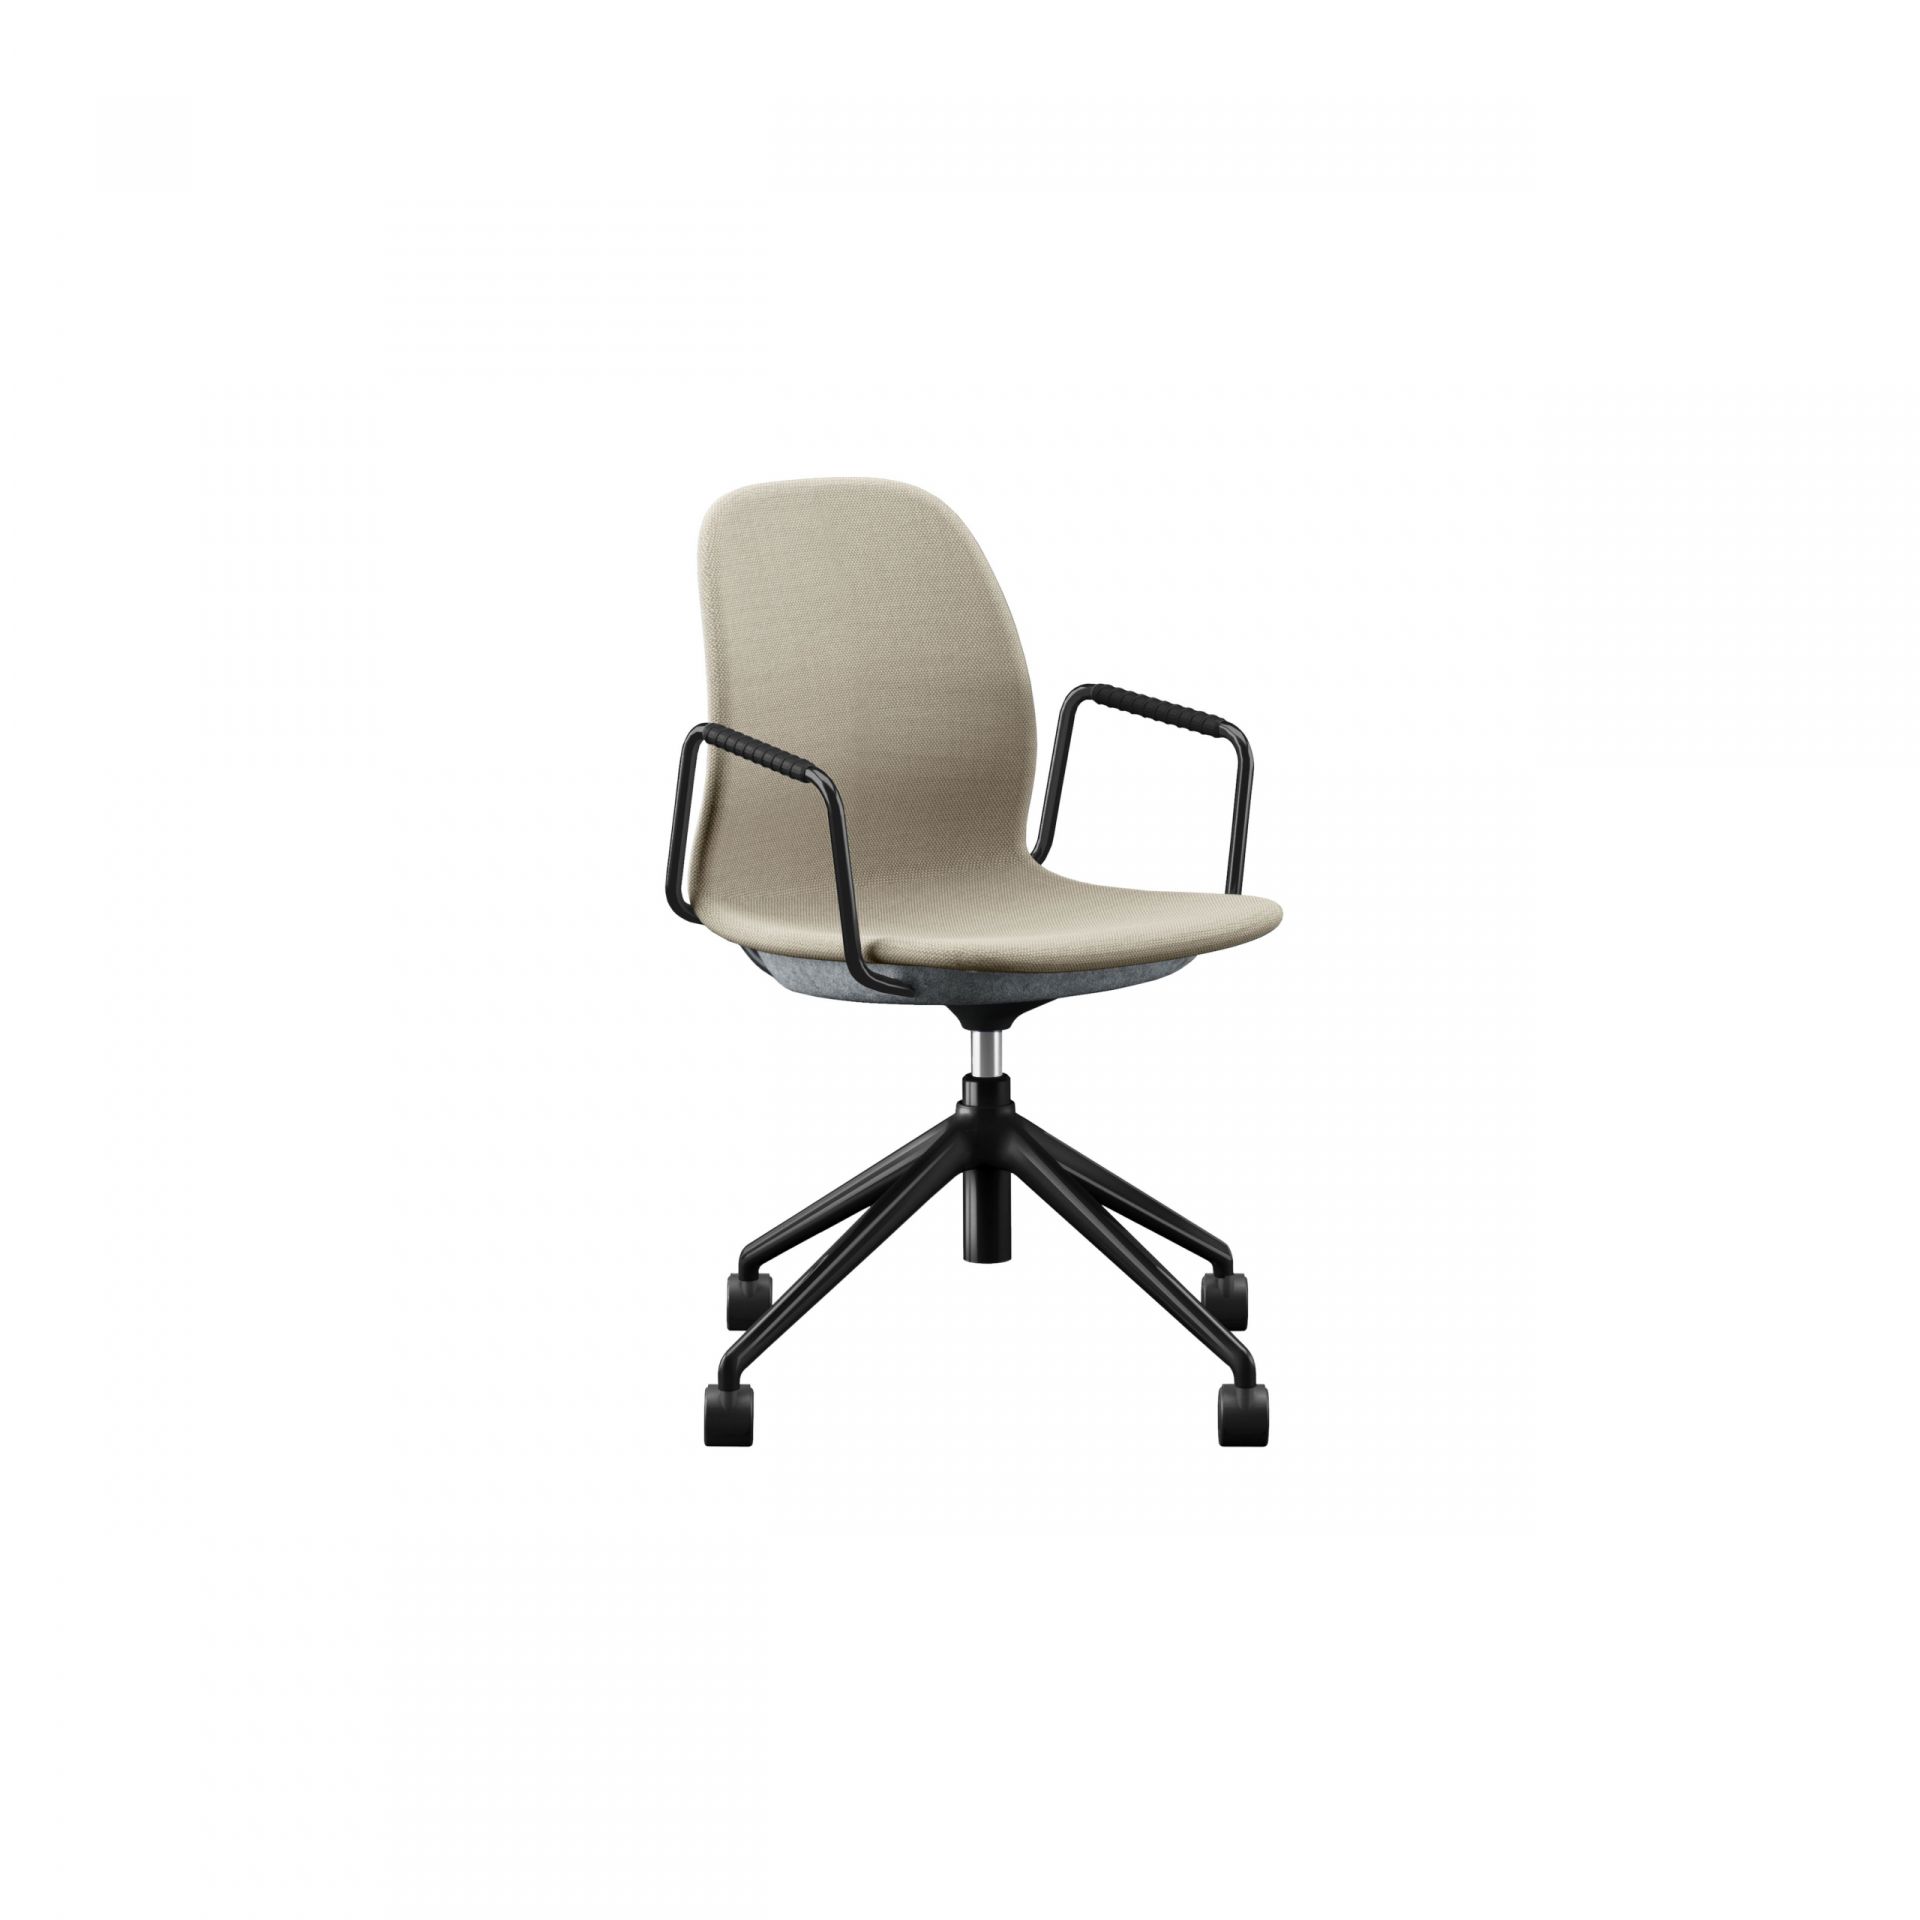 Archie Chair with swivel base product image 2